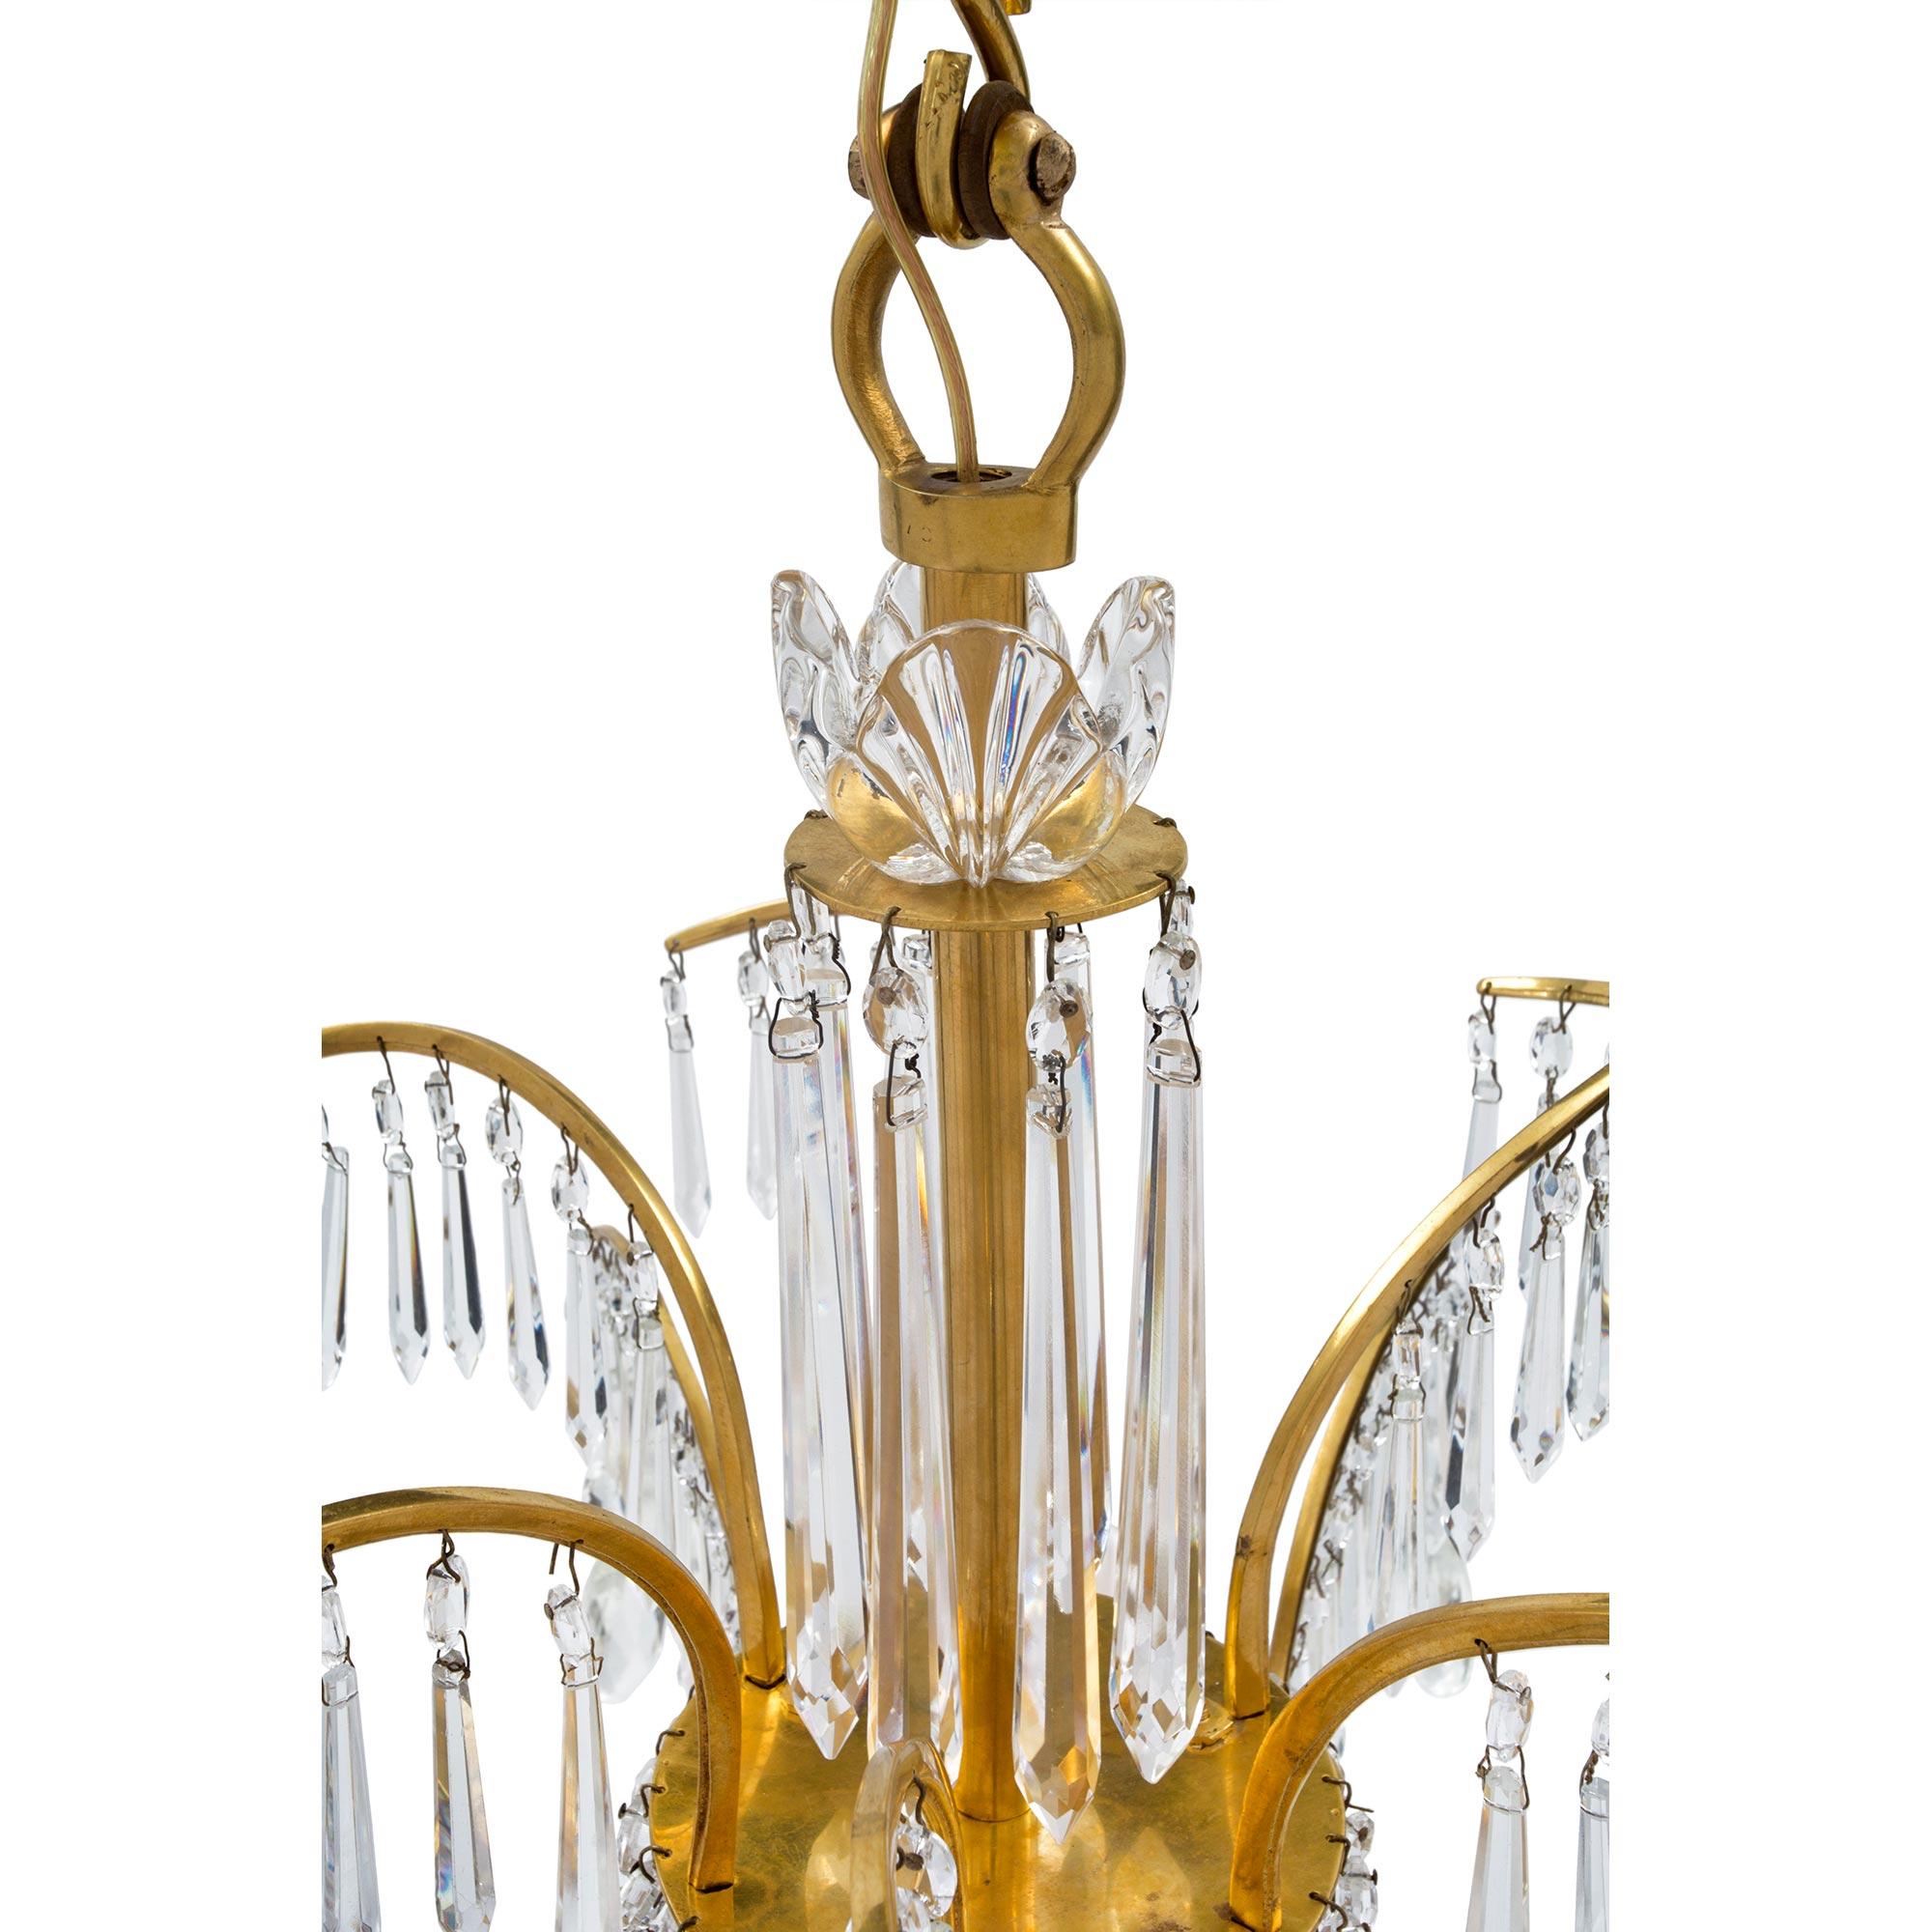 Russian 19th Century Neoclassical Ormolu and Crystal Six-Light Chandelier For Sale 1